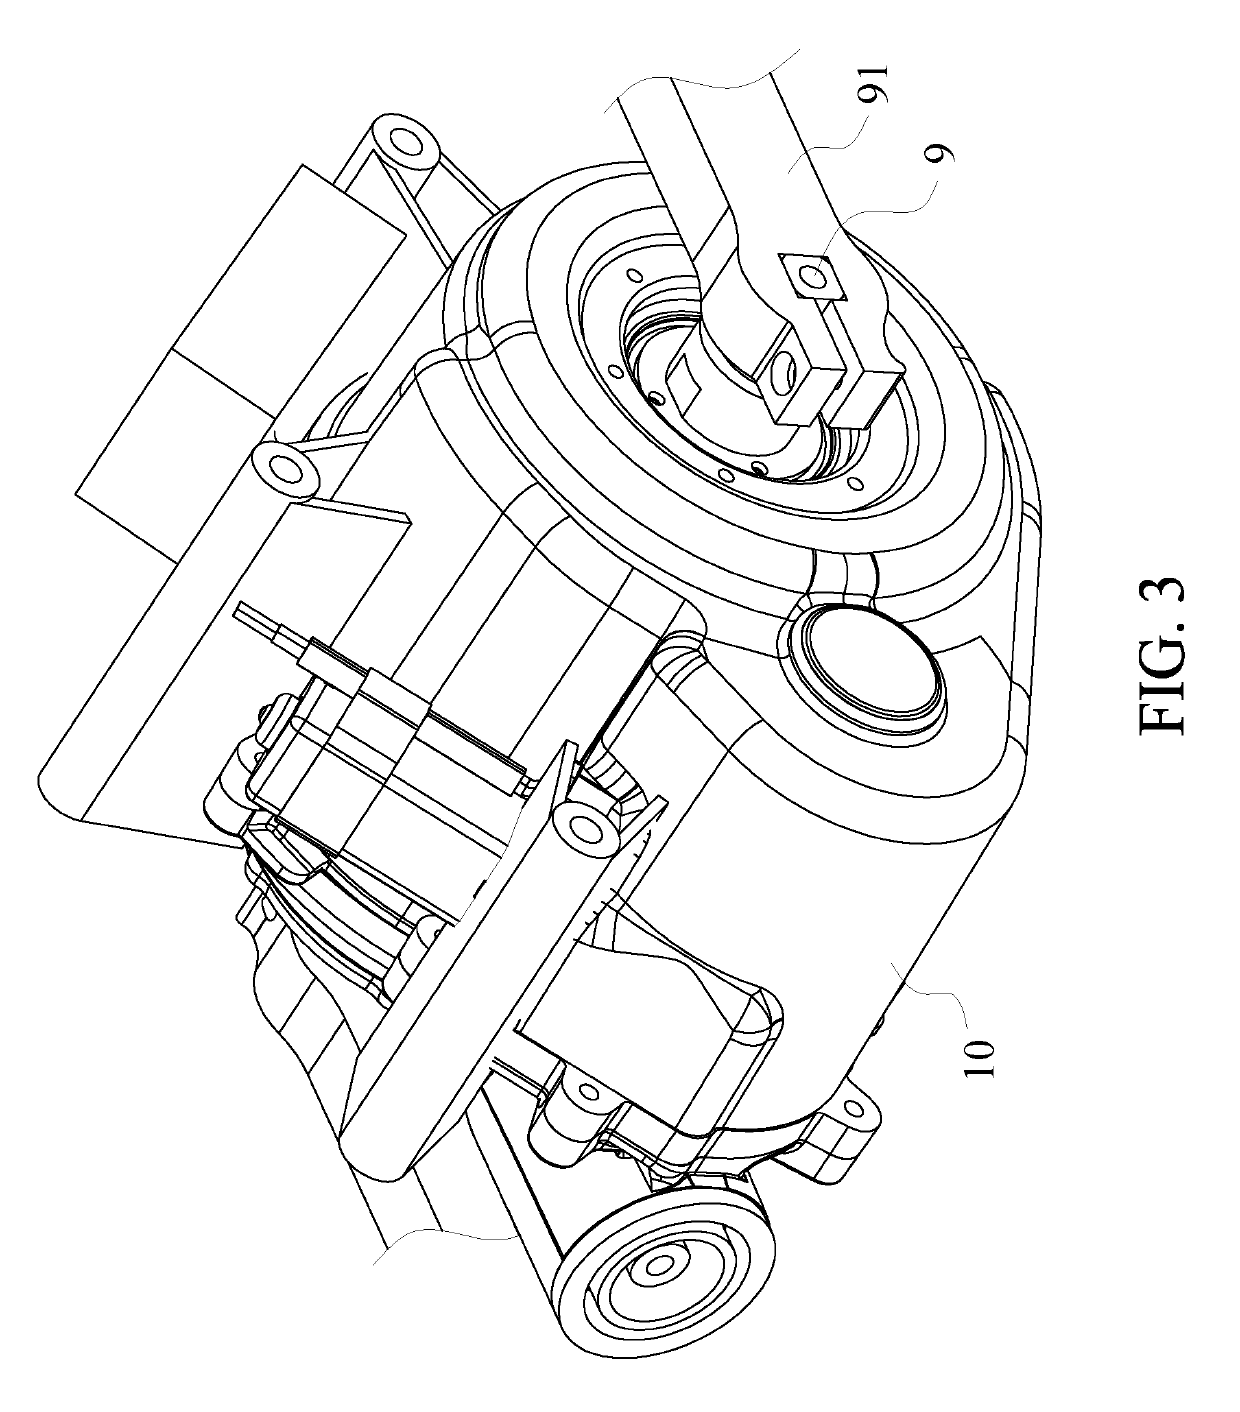 Coaxial electrically aided continuously variable transmission